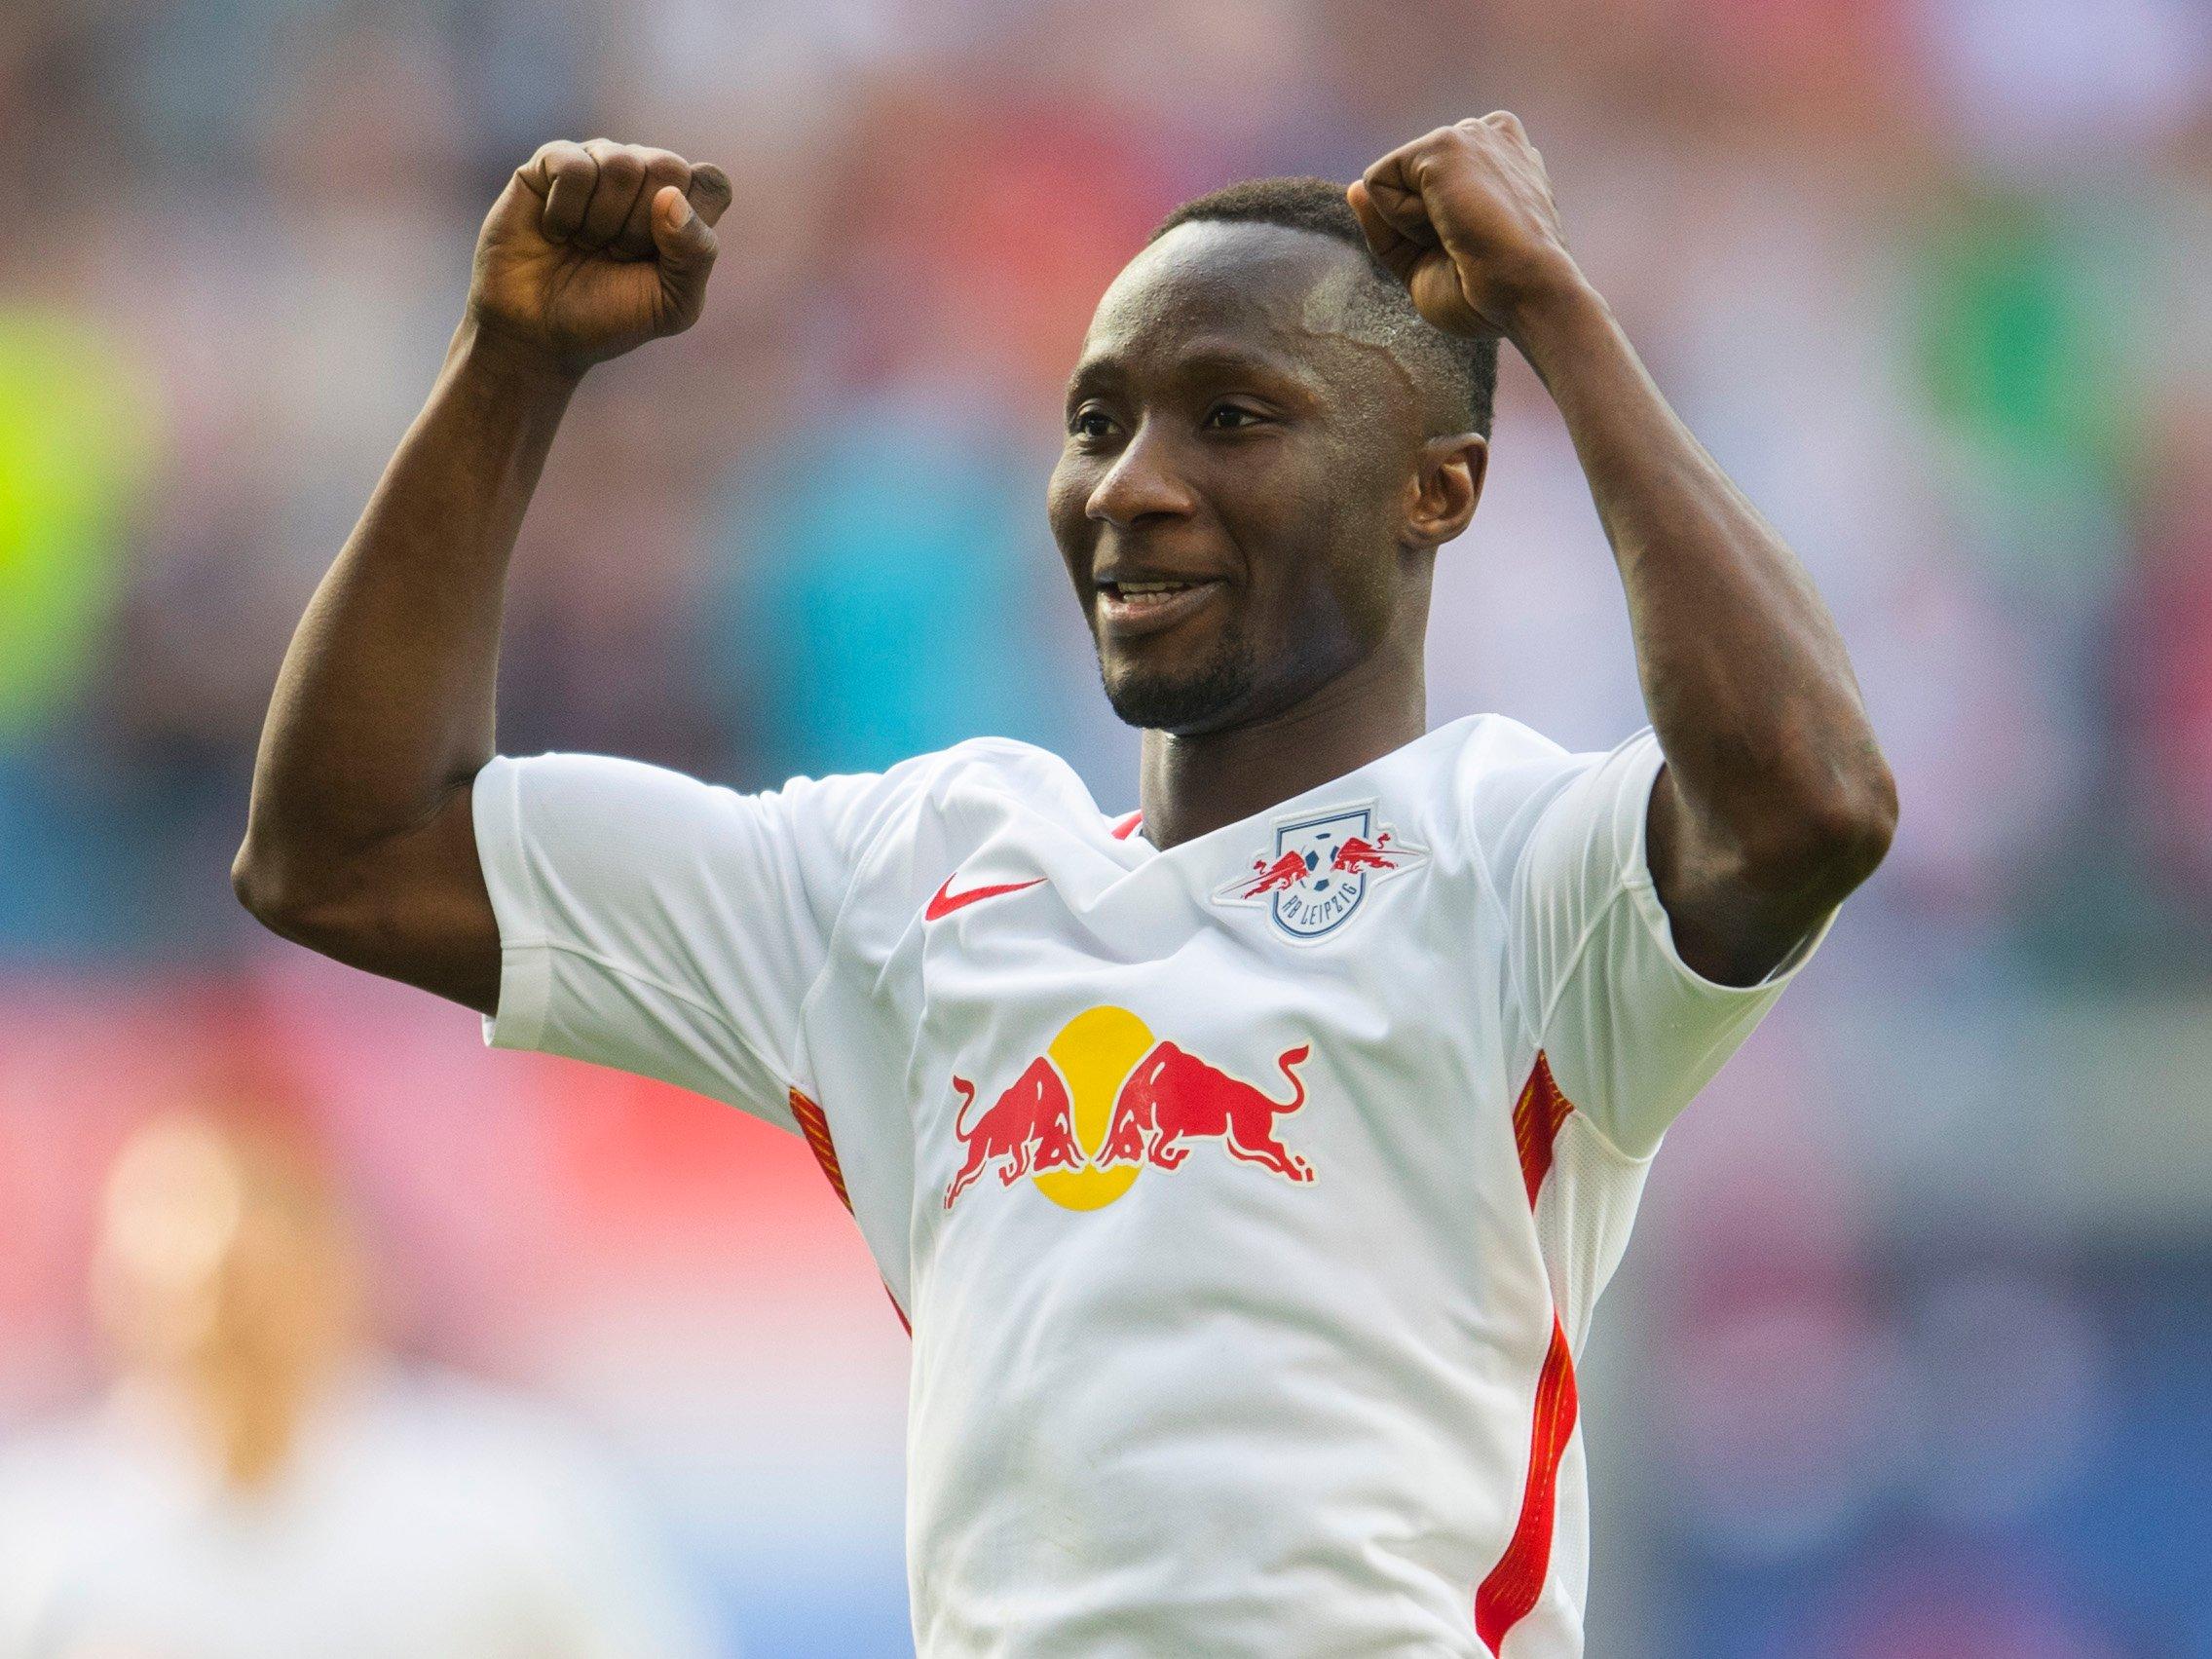 Meet Liverpool new boy Naby Keita, the ambitious yet humble